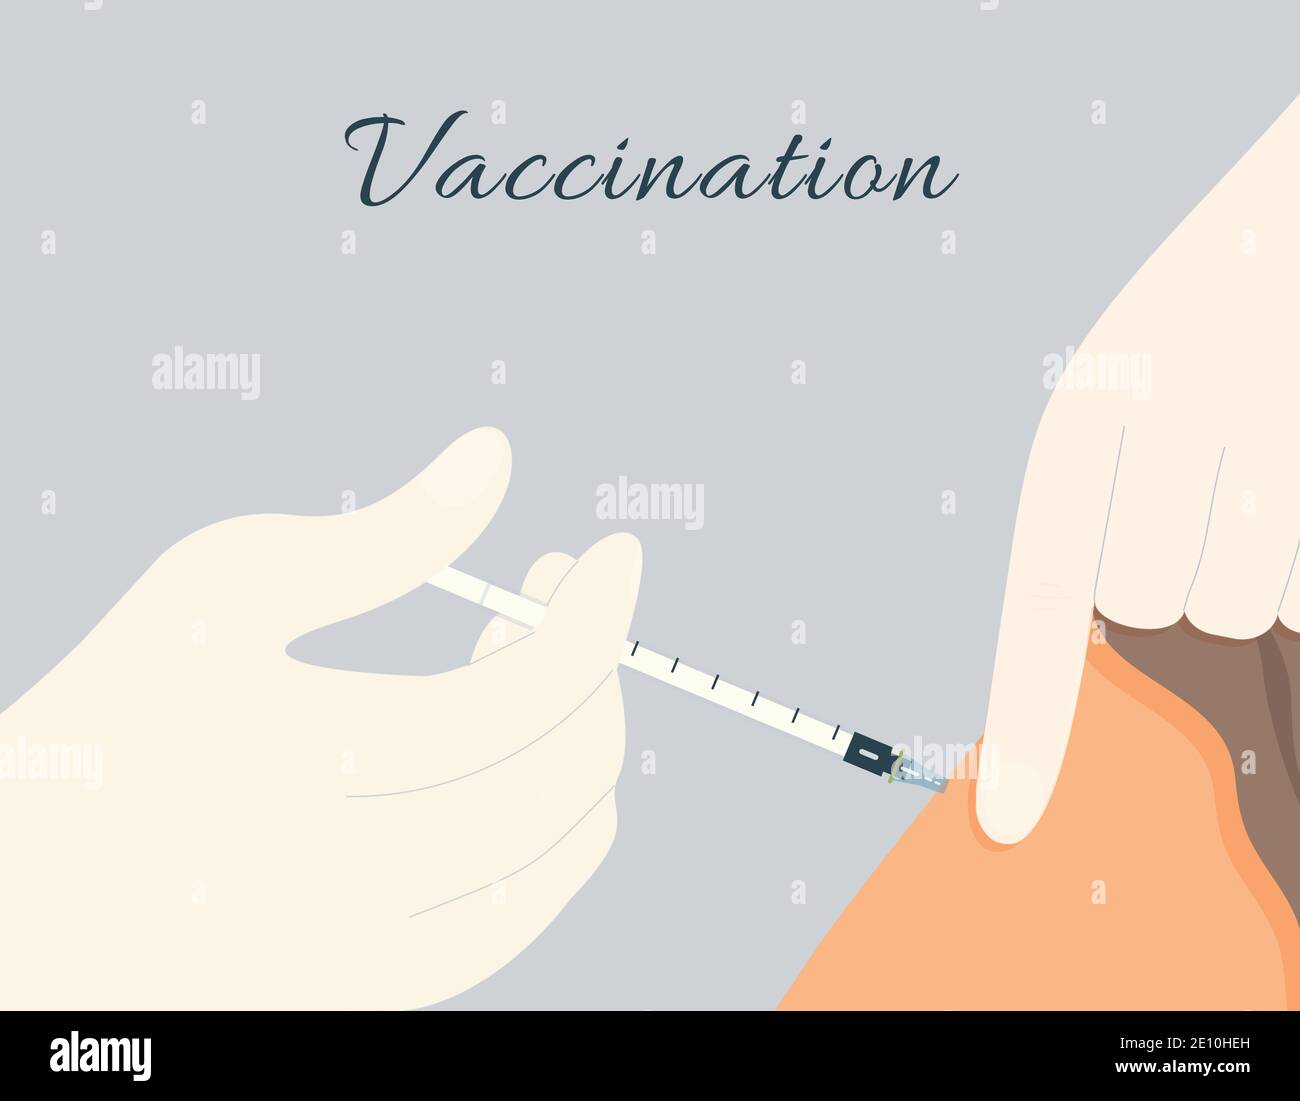 Immunisation with Covid-19 vaccine at hospital.Doctor or nurse give an injection dose of virus vaccine with thin syringe into patient arm close-up Stock Vector